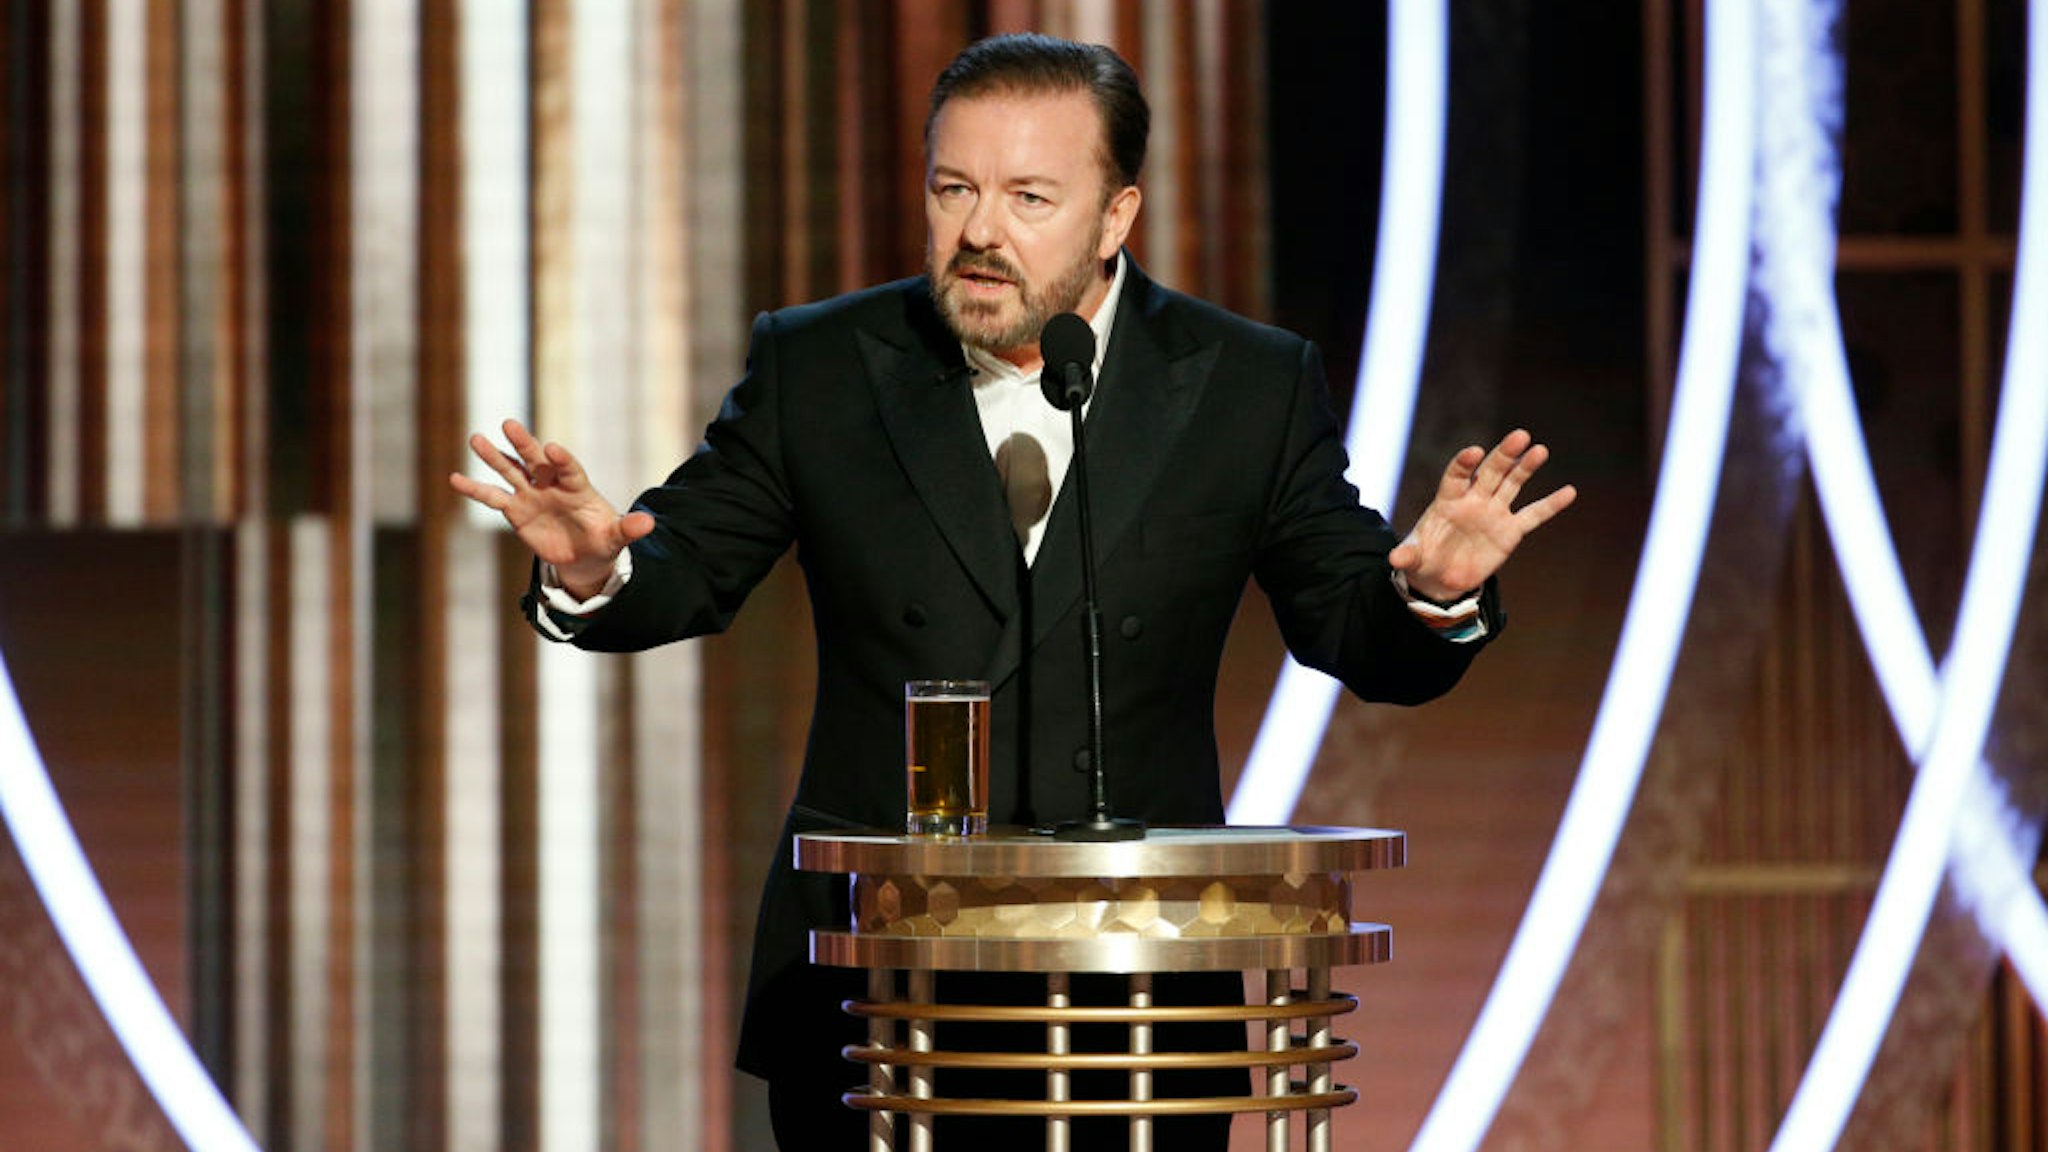 BEVERLY HILLS, CALIFORNIA - JANUARY 05: In this handout photo provided by NBCUniversal Media, LLC, host Ricky Gervais speaks onstage during the 77th Annual Golden Globe Awards at The Beverly Hilton Hotel on January 5, 2020 in Beverly Hills, California.